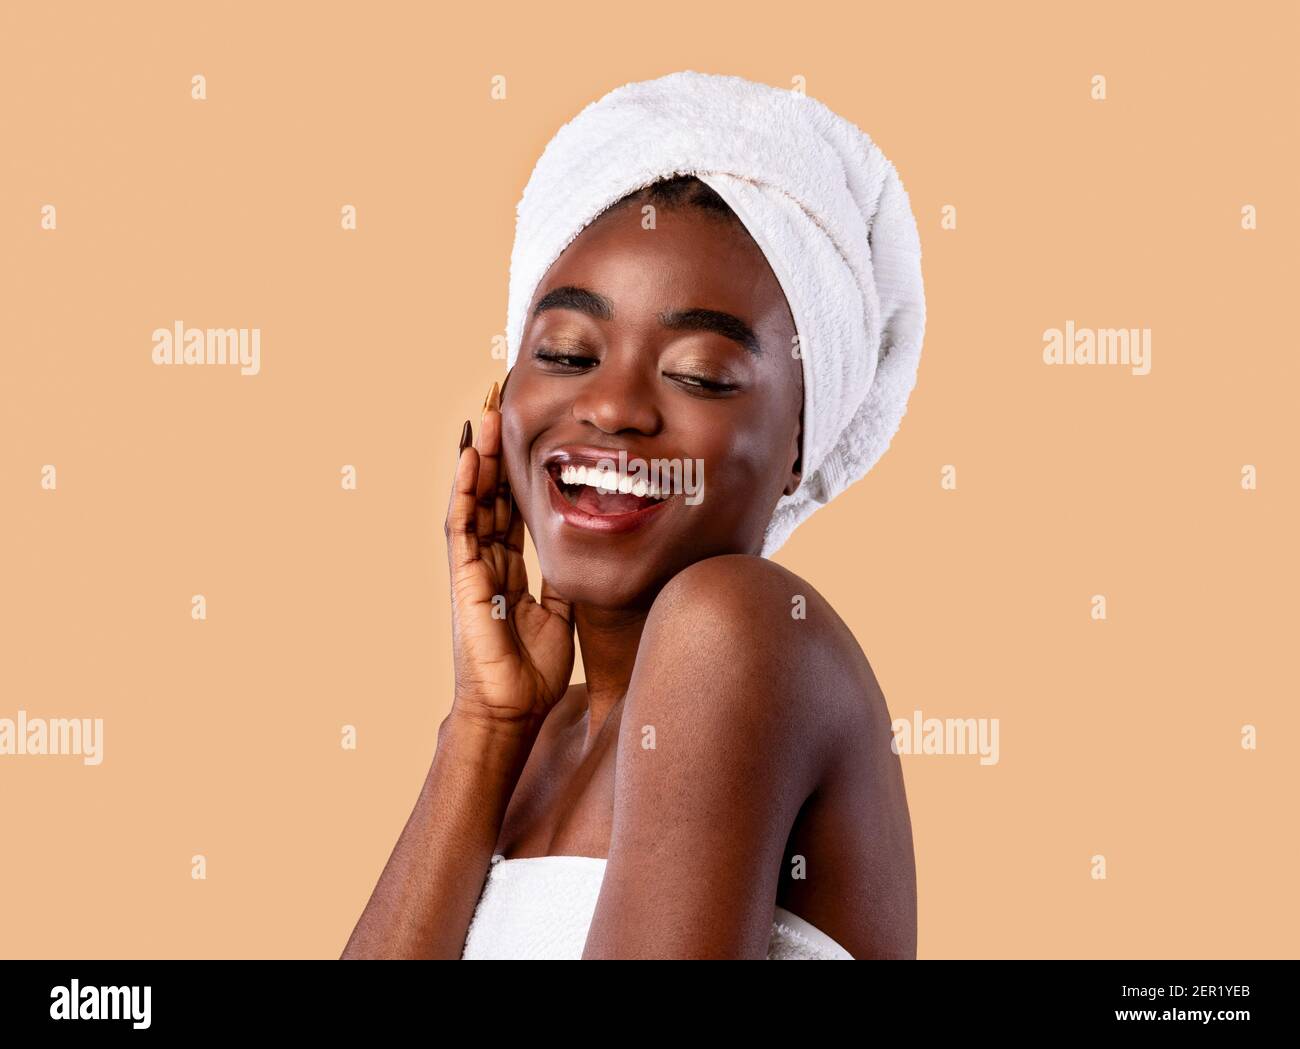 Small Towel Face Cleaning Topdown Isolated Stock Photo 1158822964